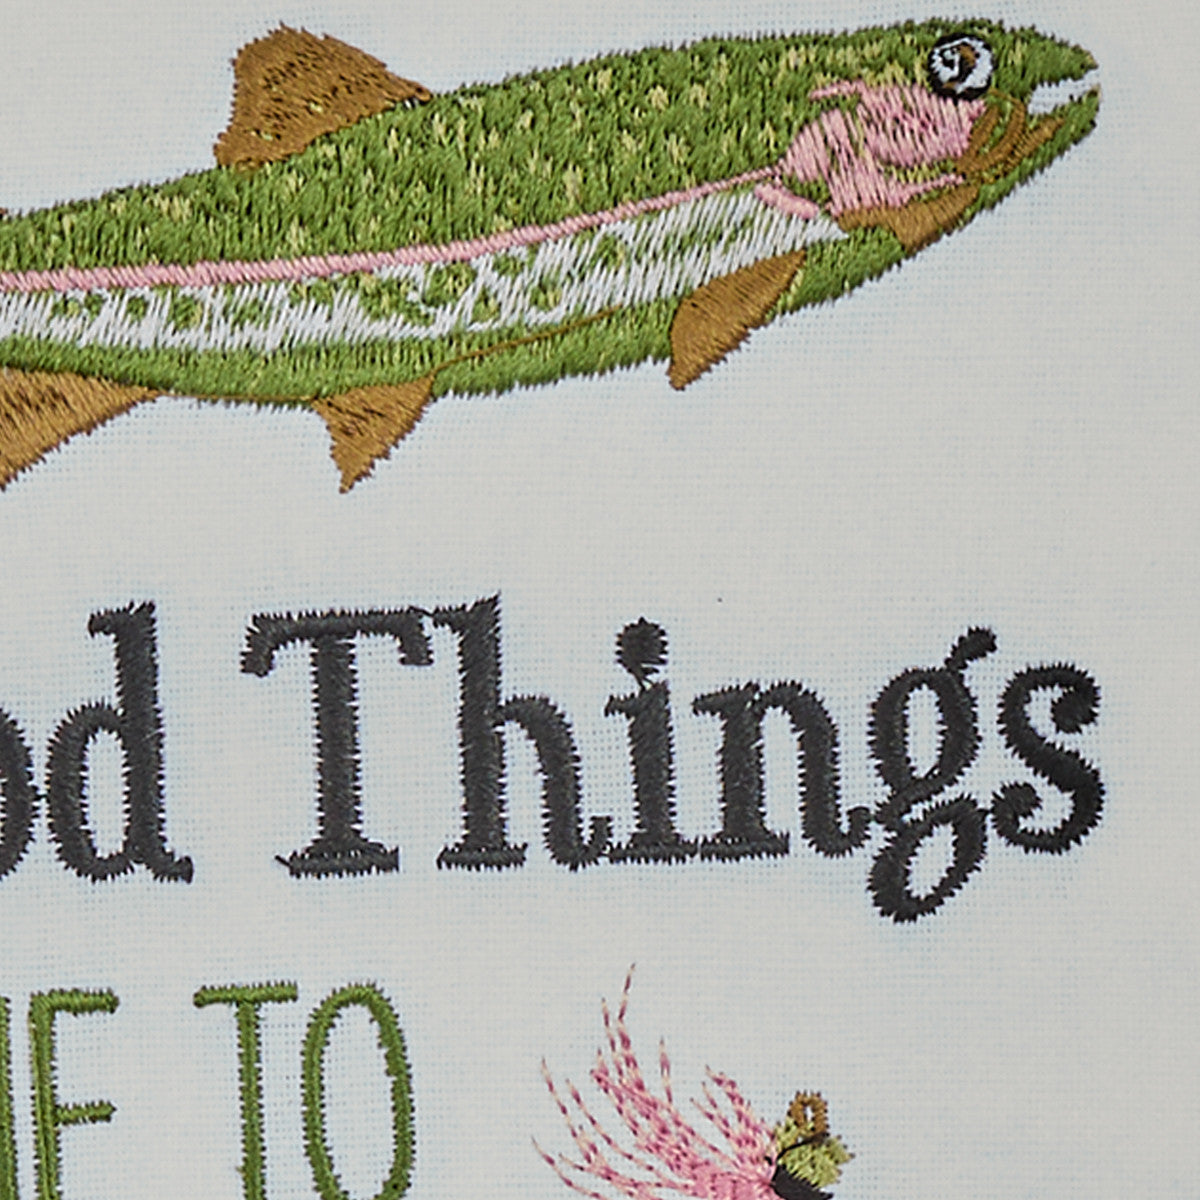 Good Things Come Embroidered Dishtowels - Set of 6 Park Designs